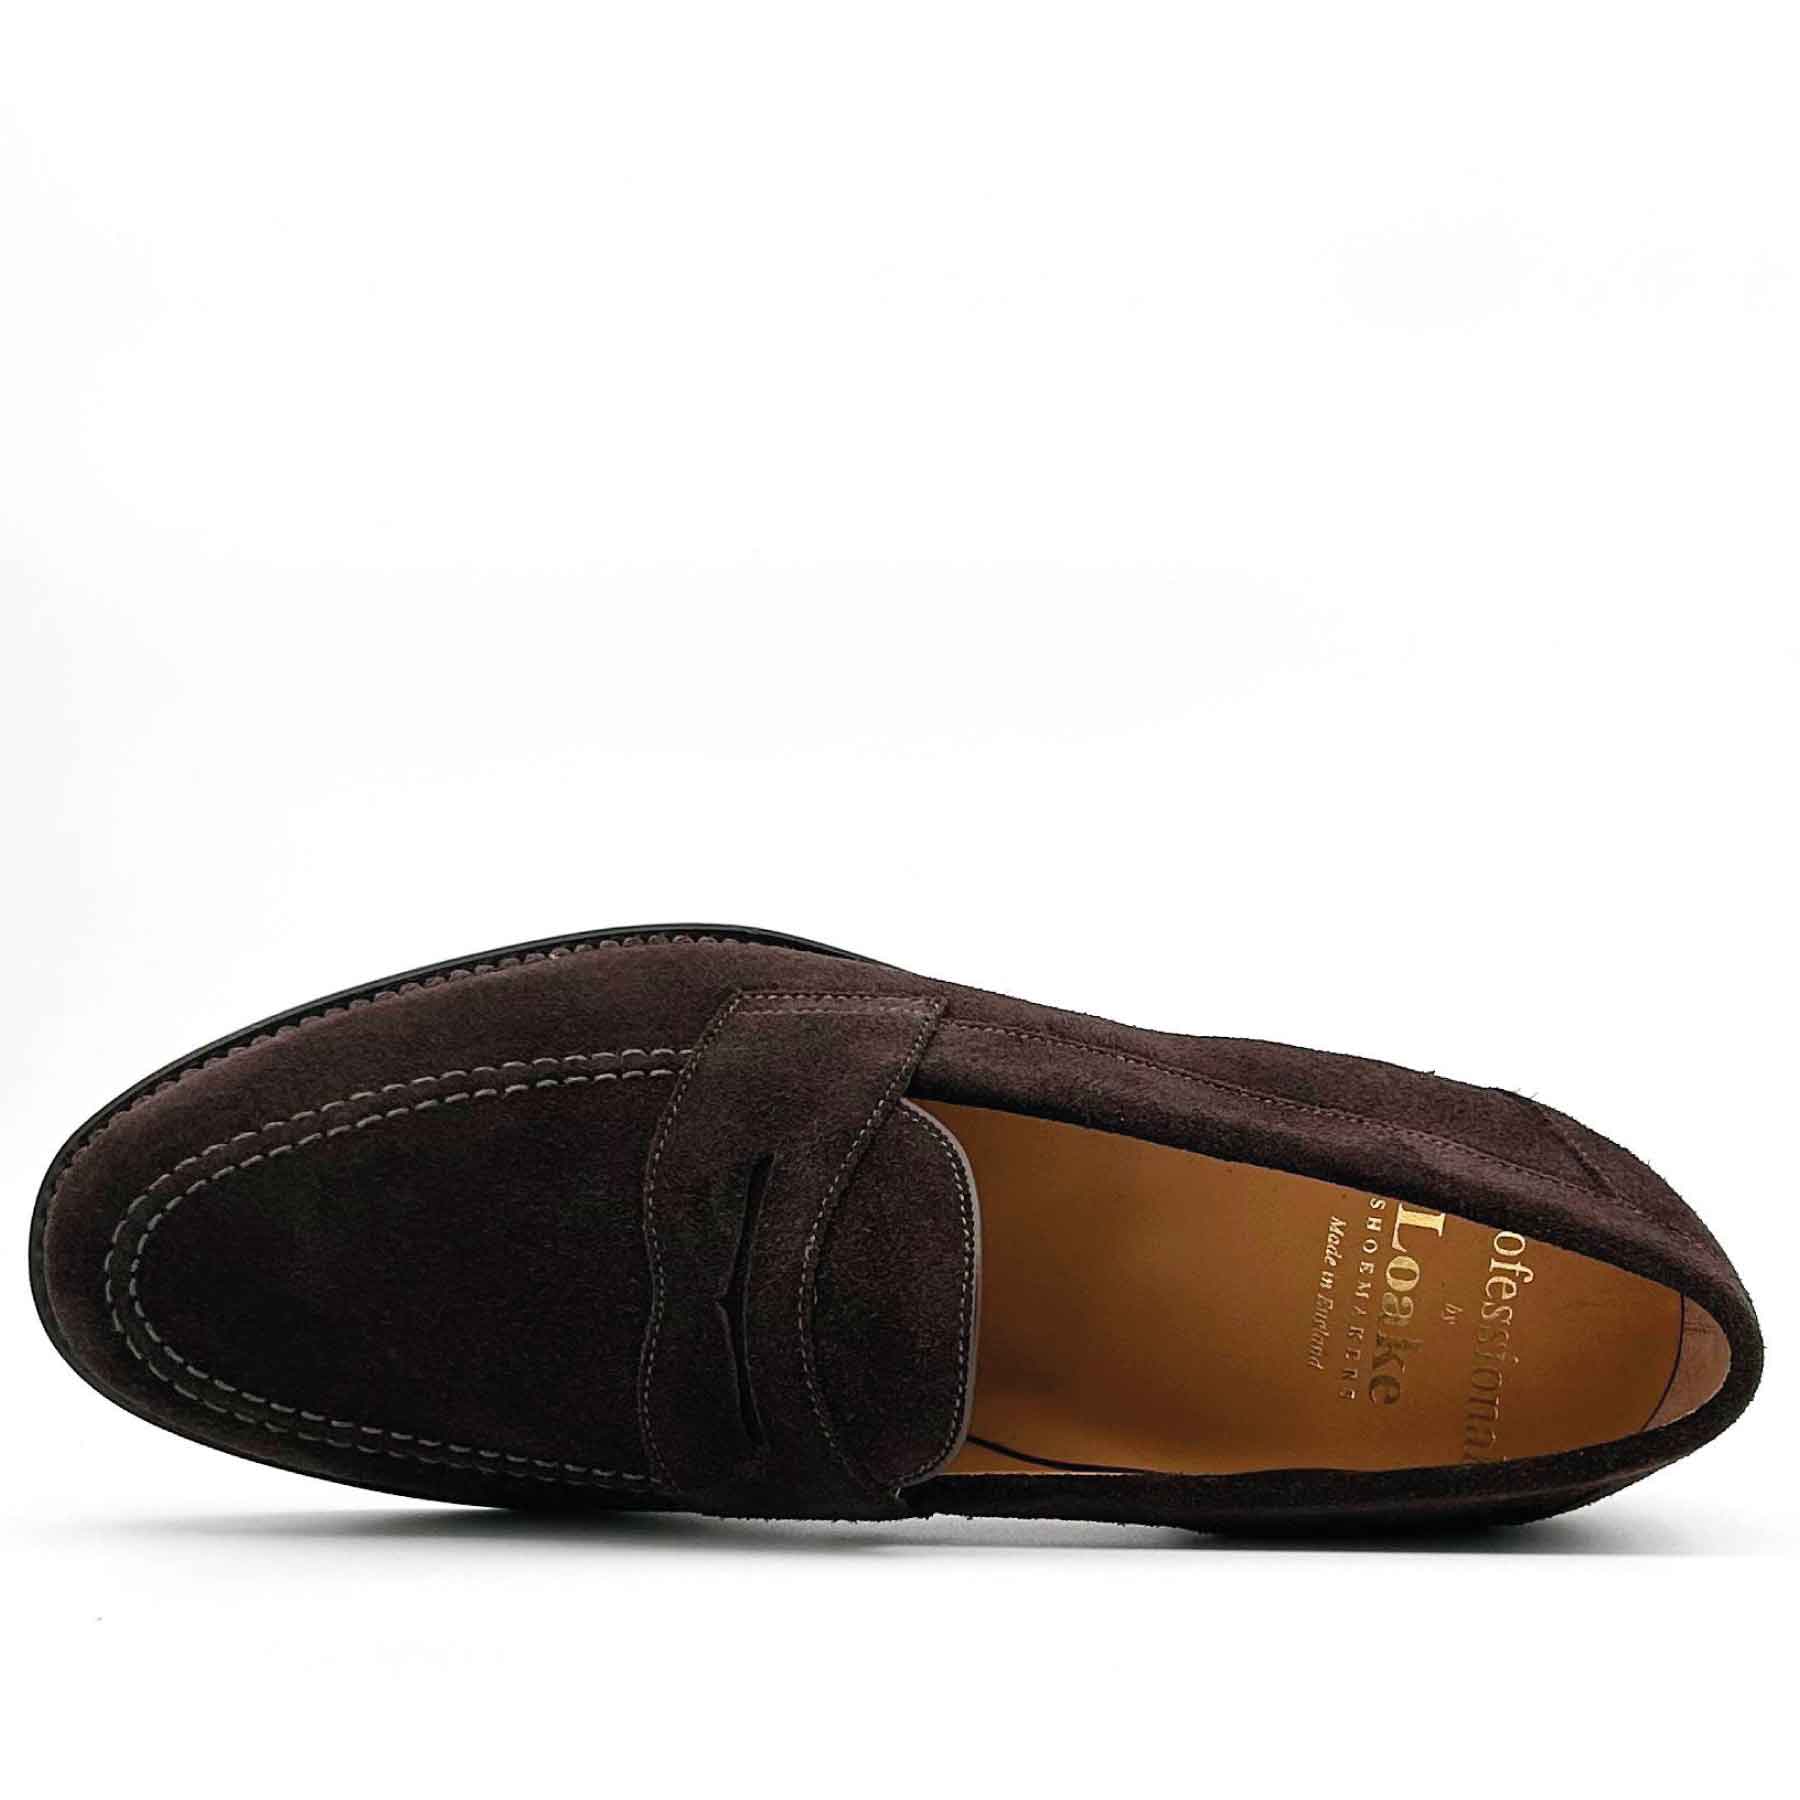 Imperial Choc Brown Suede Apron Penny Loafer